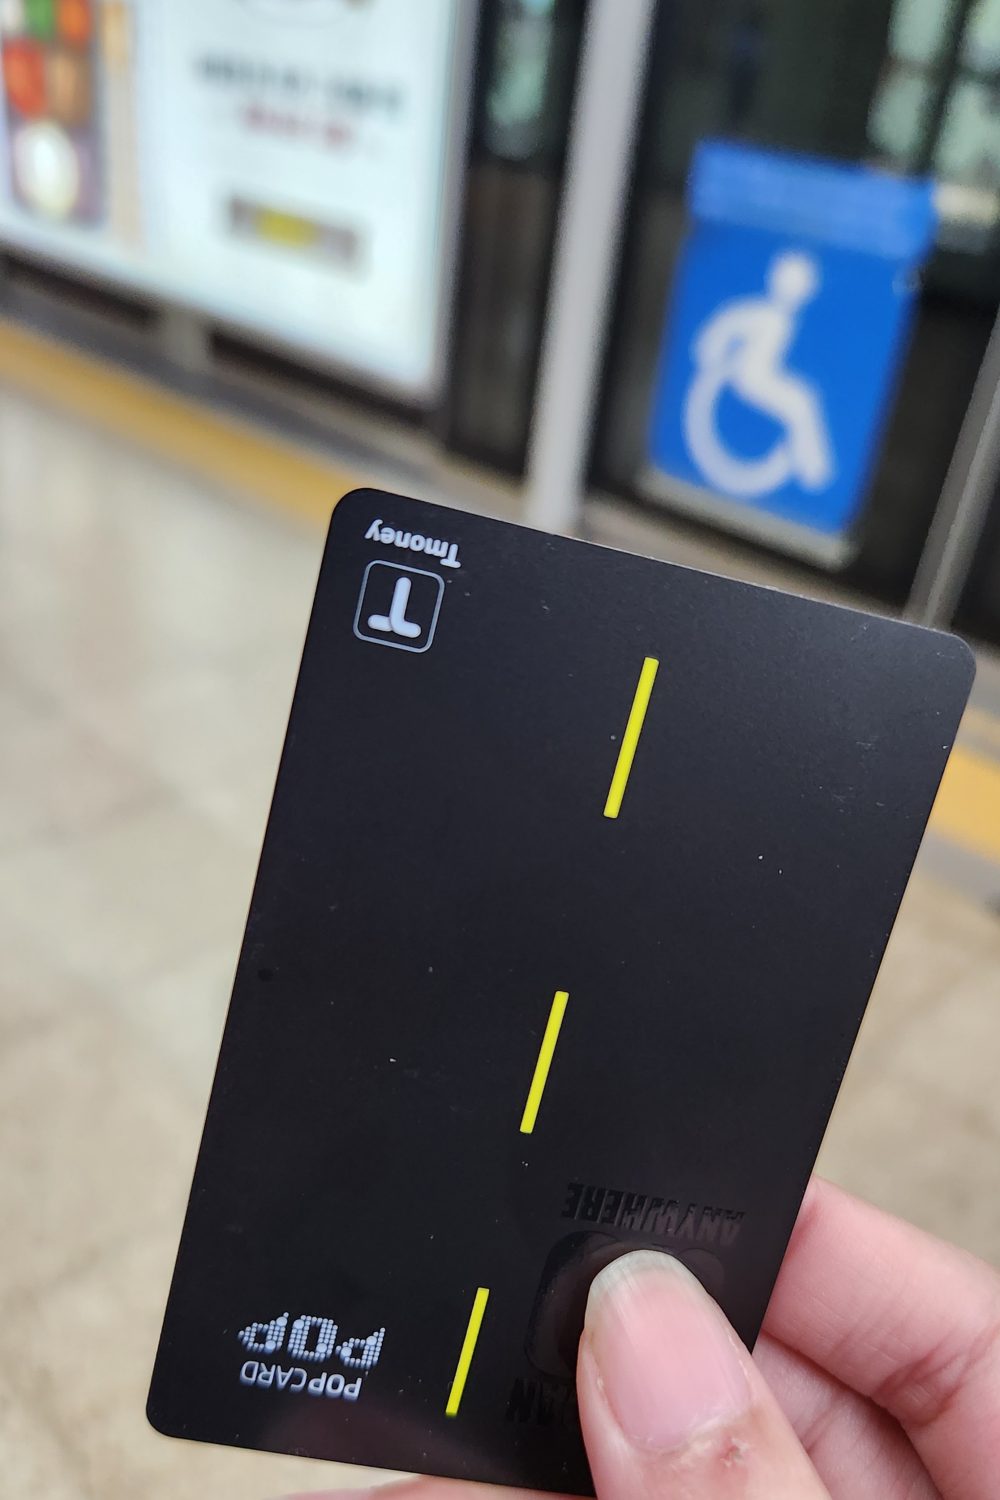 t-money card for metro system in seoul